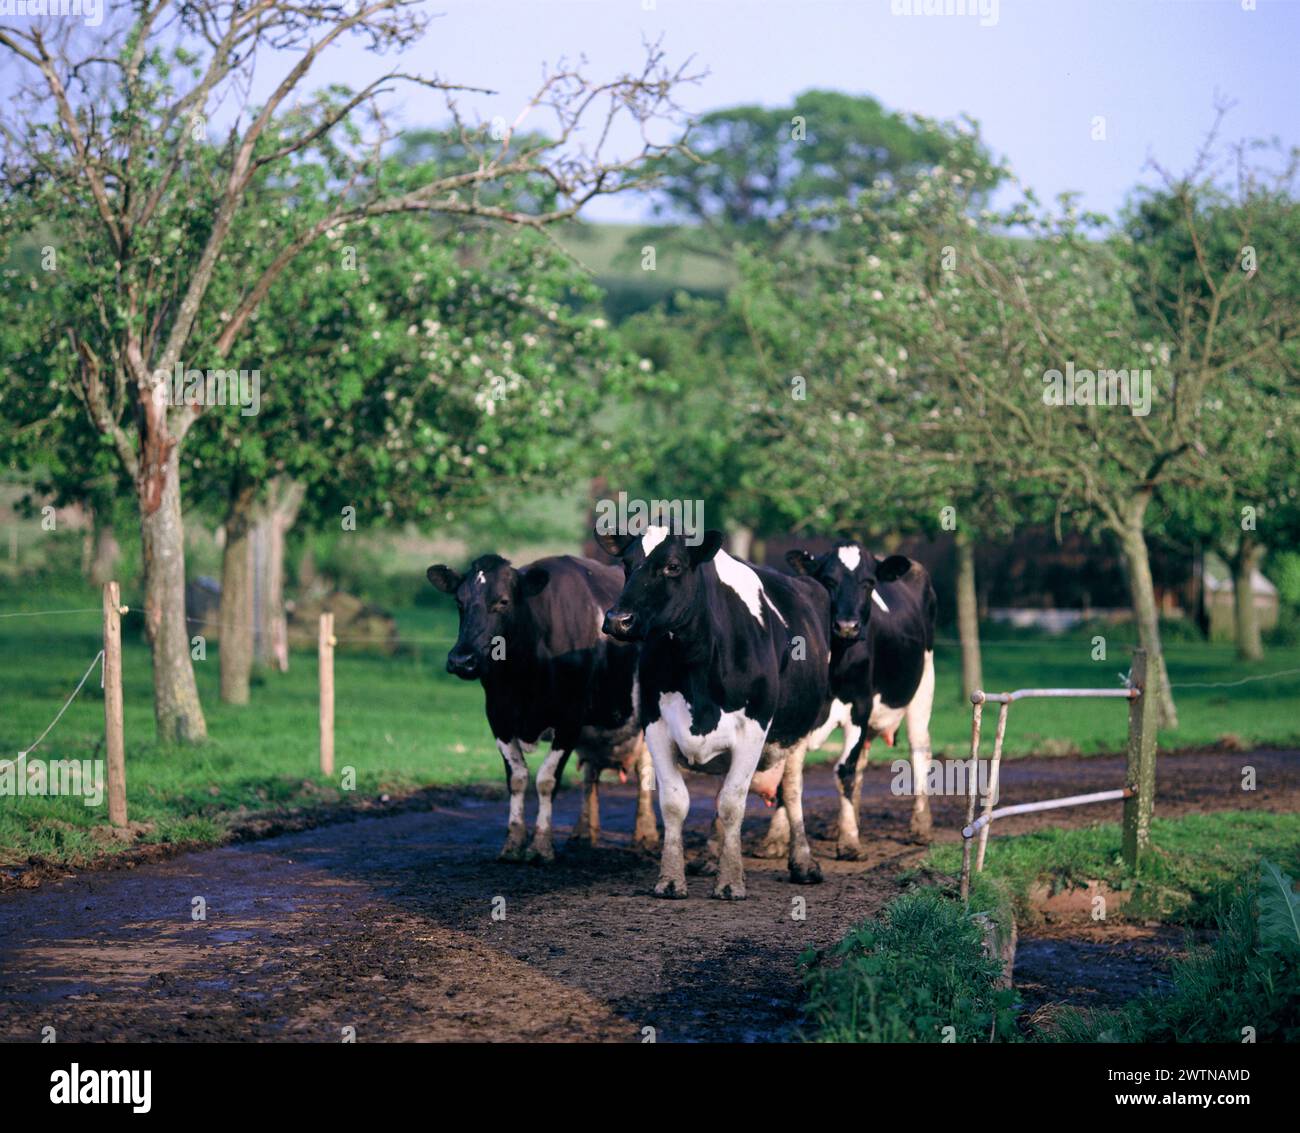 England. Somerset. Animal farming. Dairy cows on track through orchard. Stock Photo